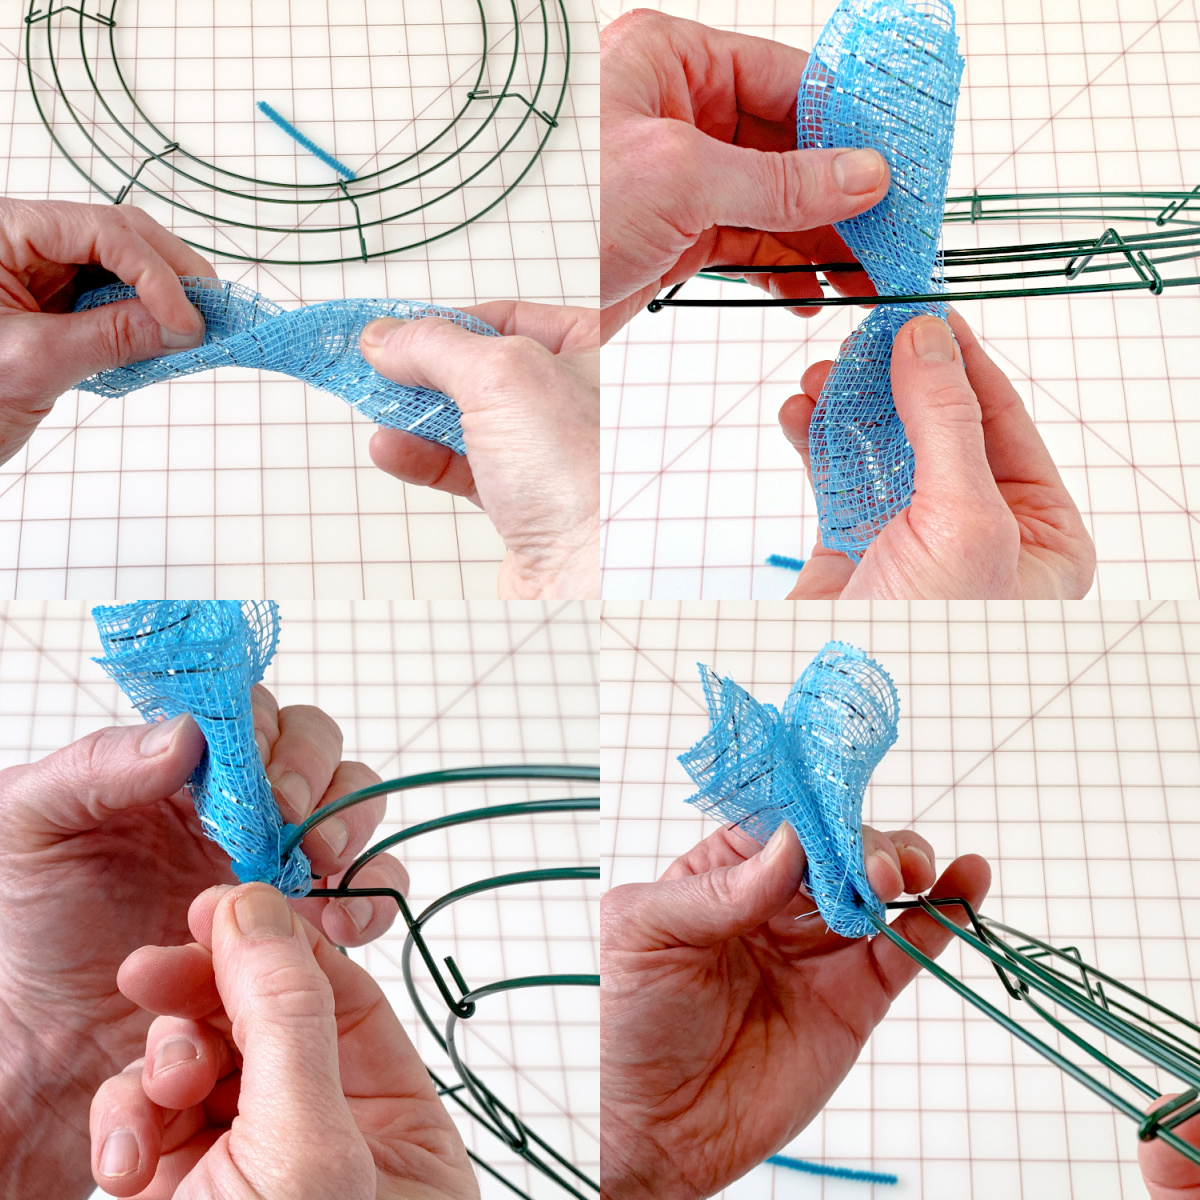 Wrapping a piece of mesh around the wire and attaching with a pipe cleaner